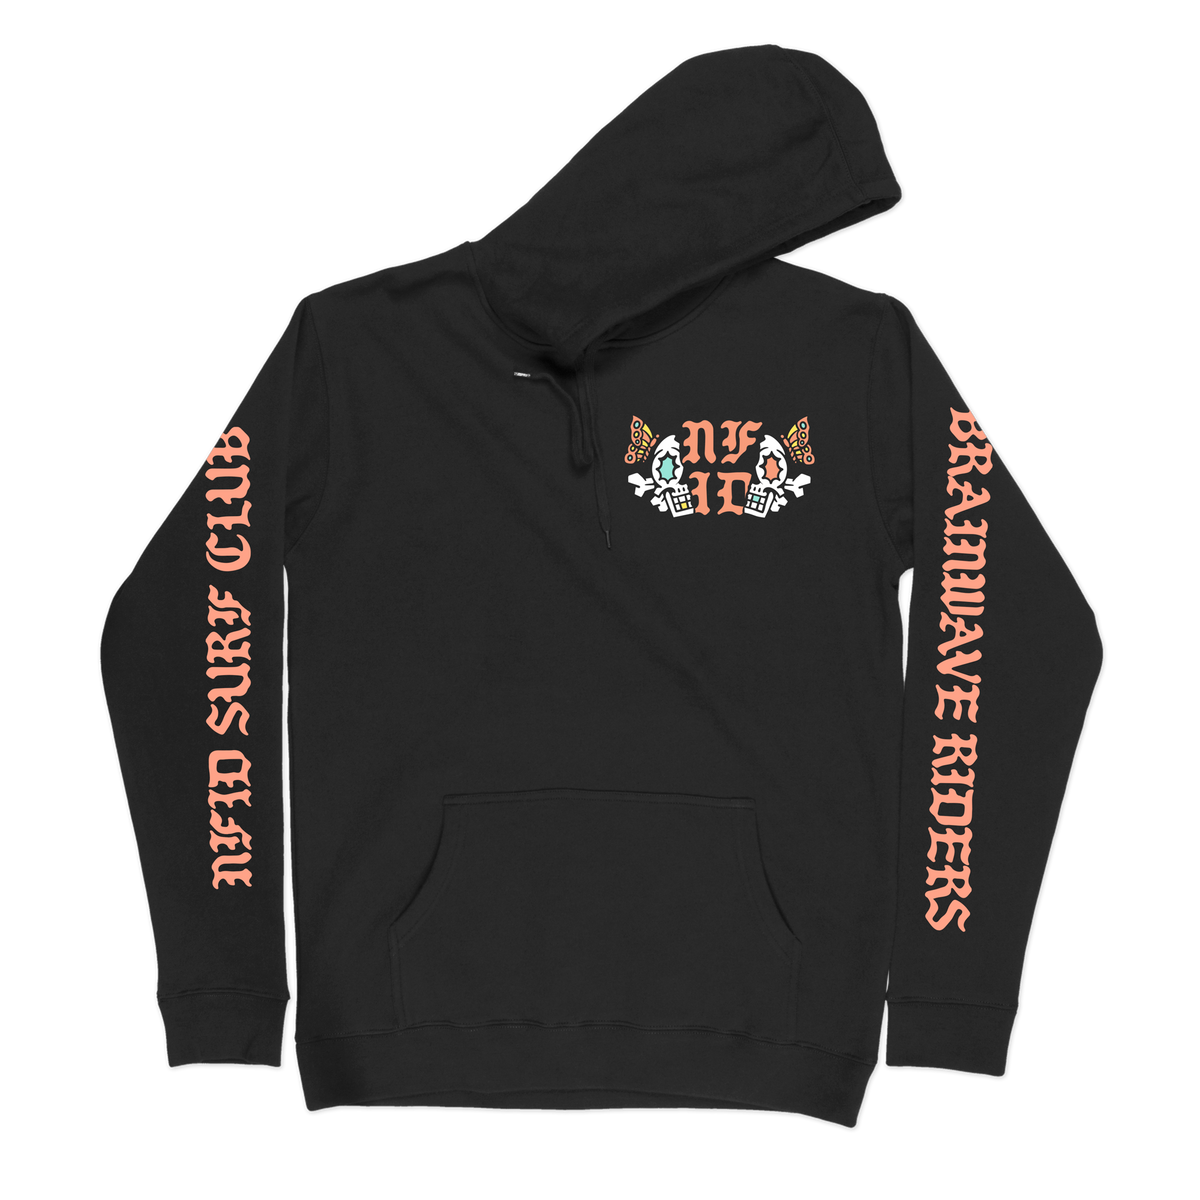 DJ Javier x NFID Collab Waves of Consciousness Limited Edition Hooded  Sweatshirt